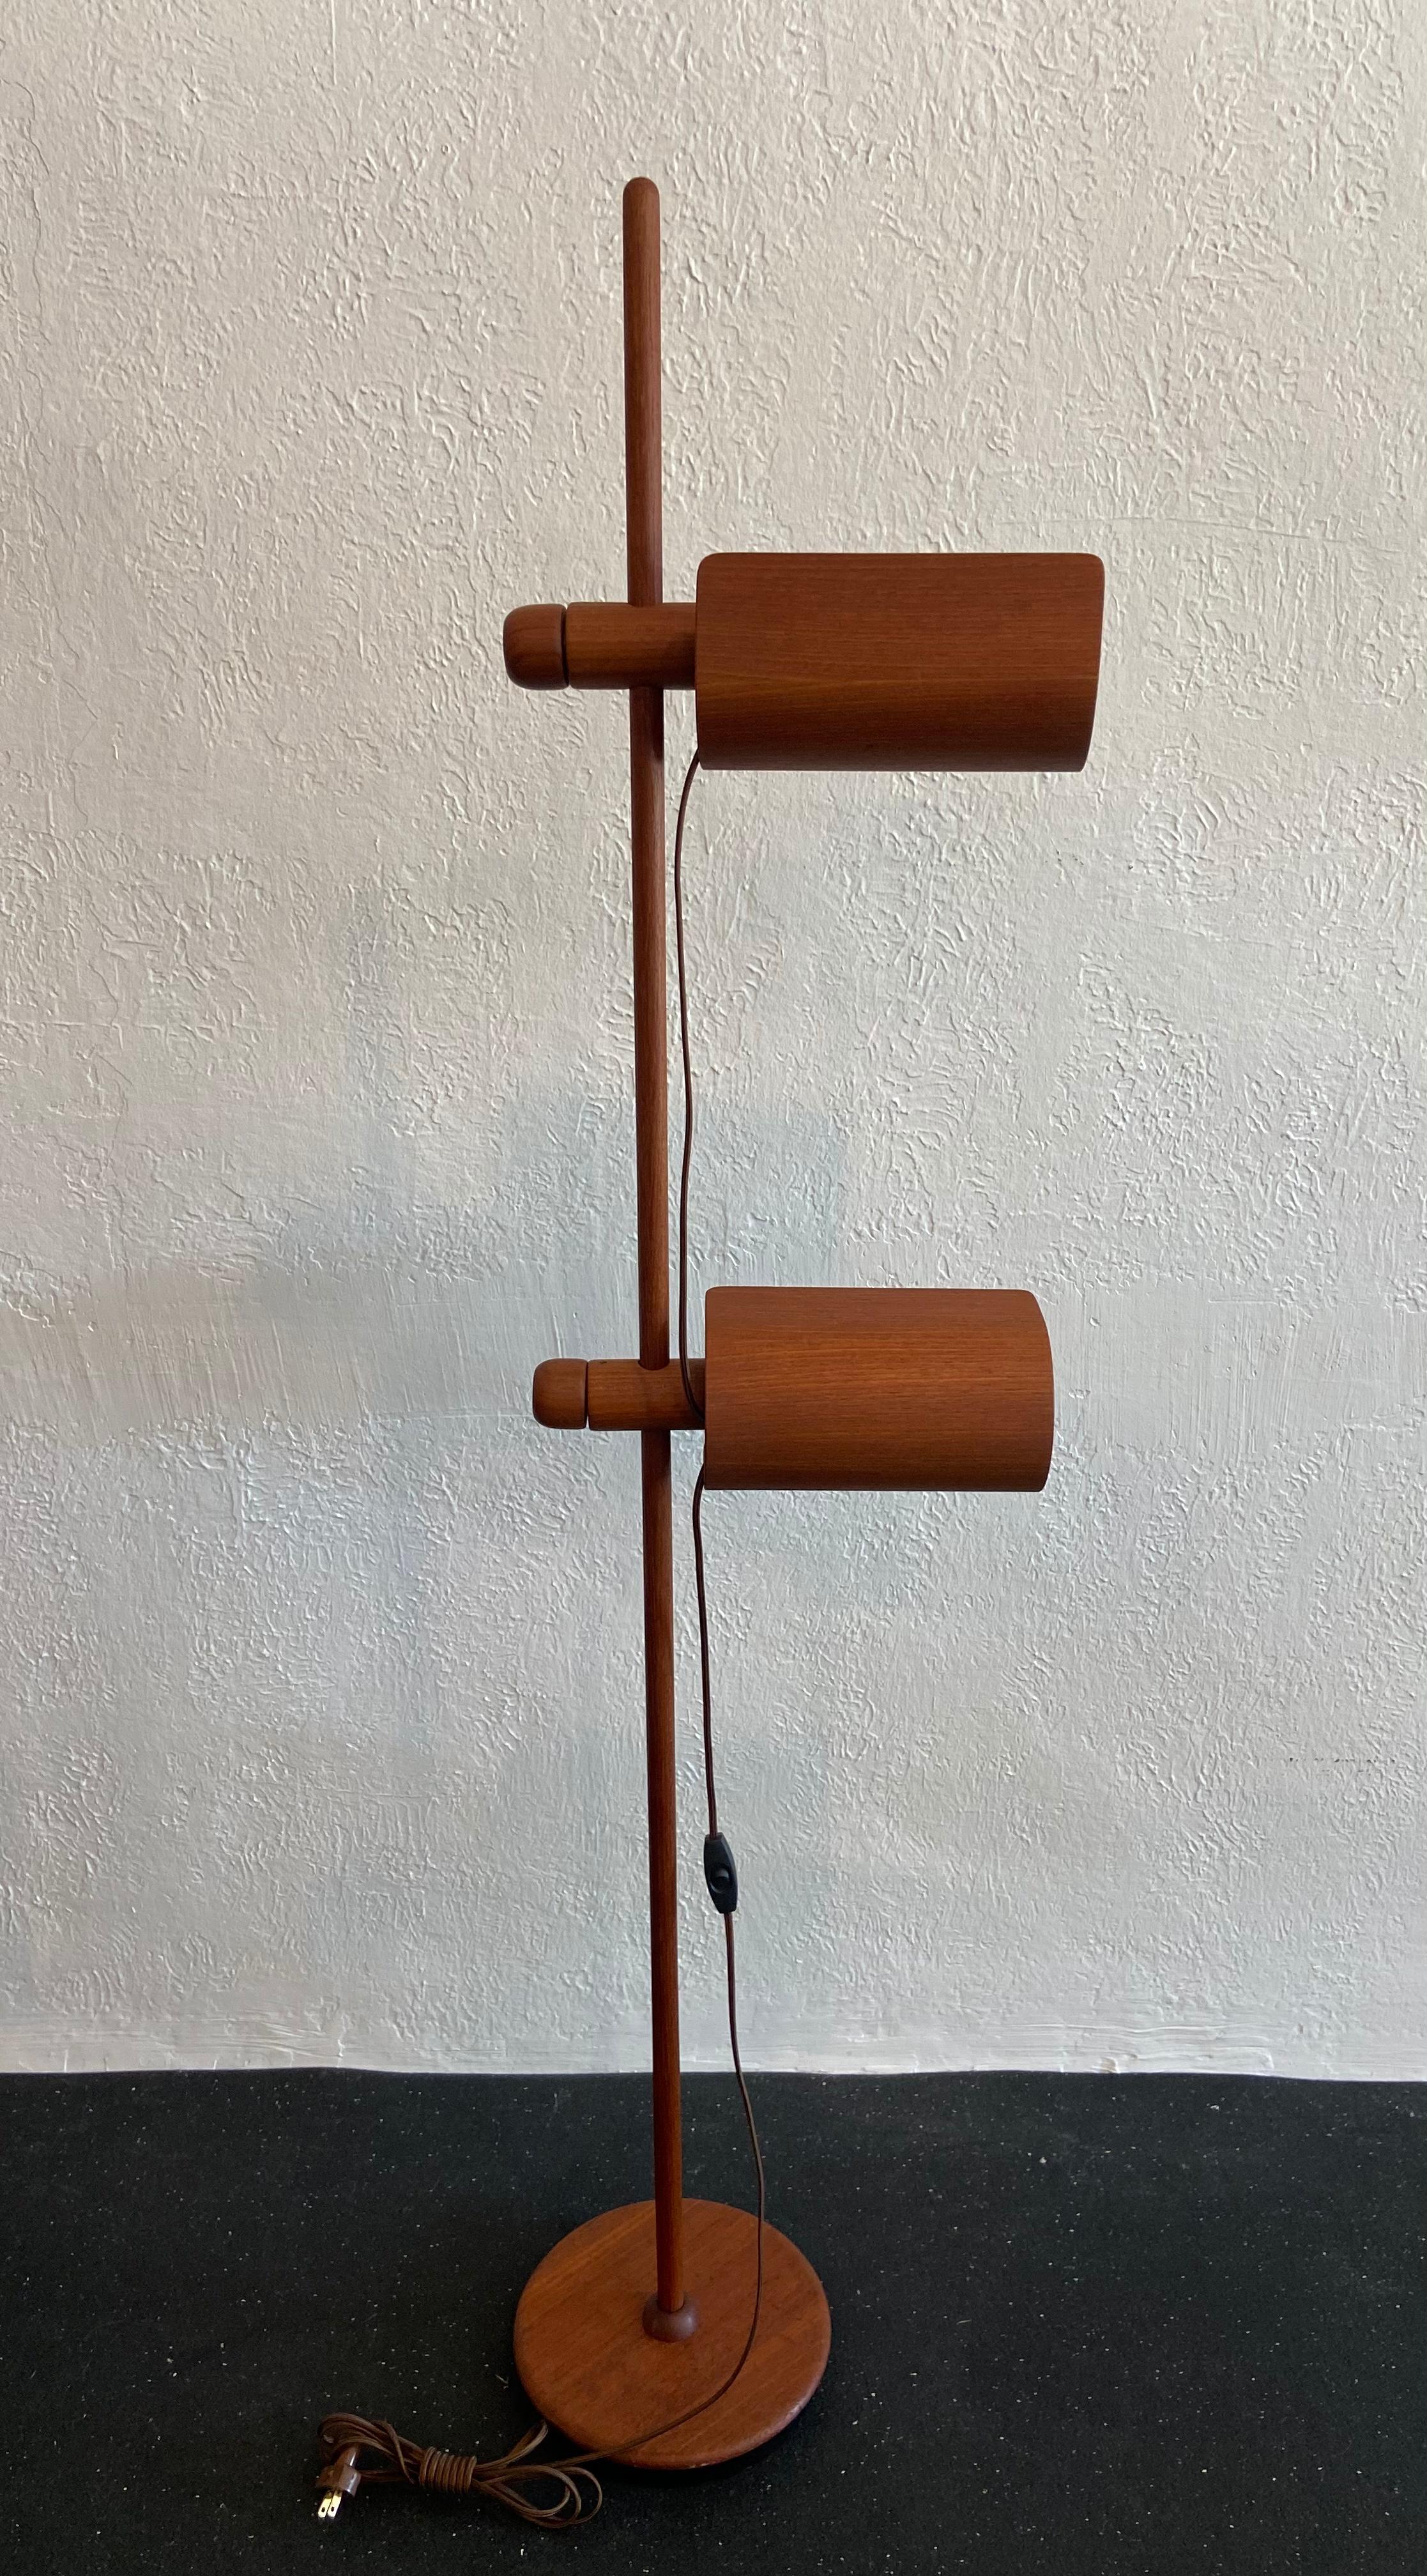 Fully Adjustable Teak Floor Lamp In Good Condition For Sale In West Palm Beach, FL